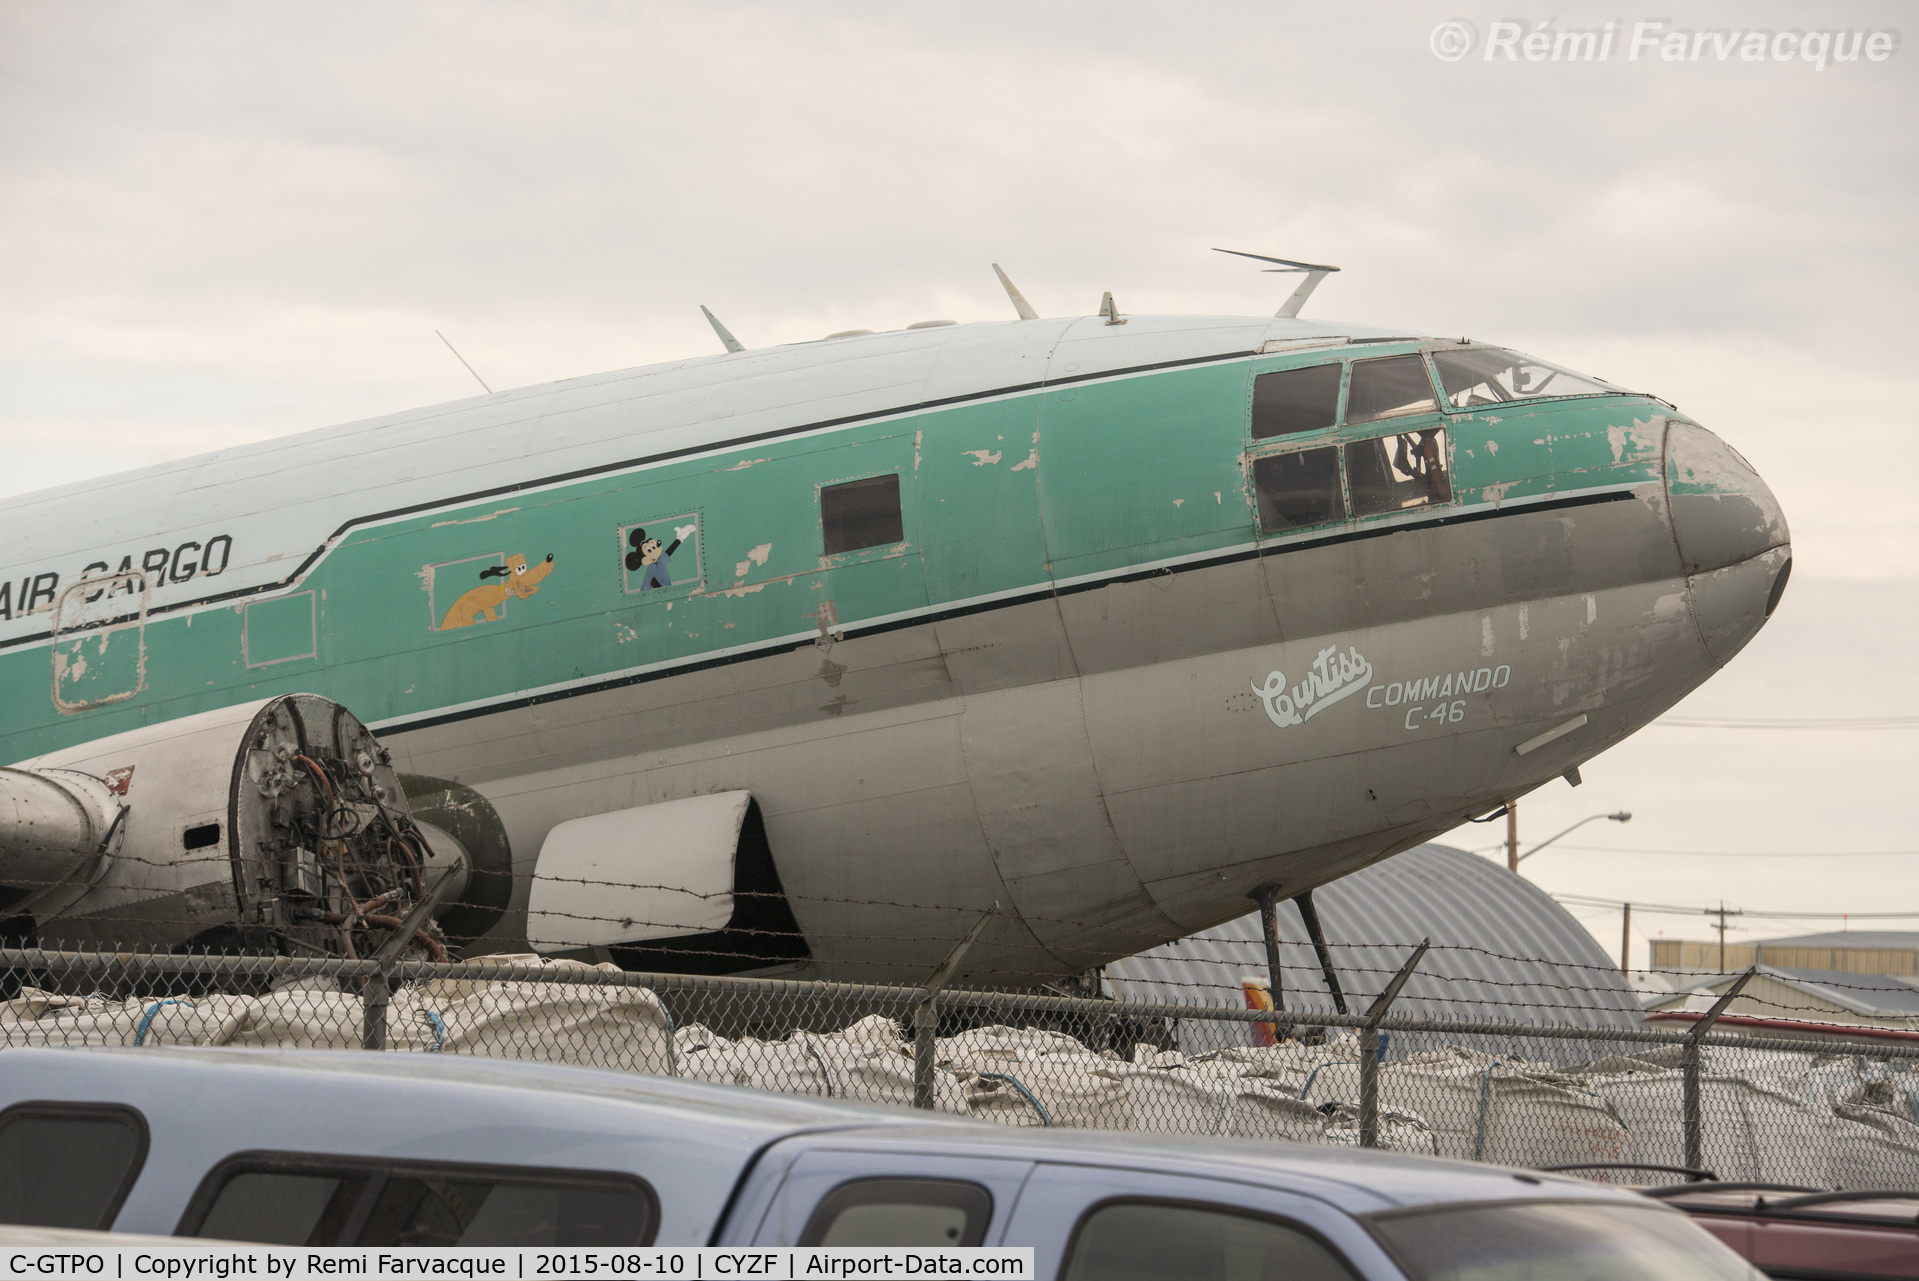 C-GTPO, 1944 Curtiss C-46F Commando C/N 22556, Sadly, being parted out.